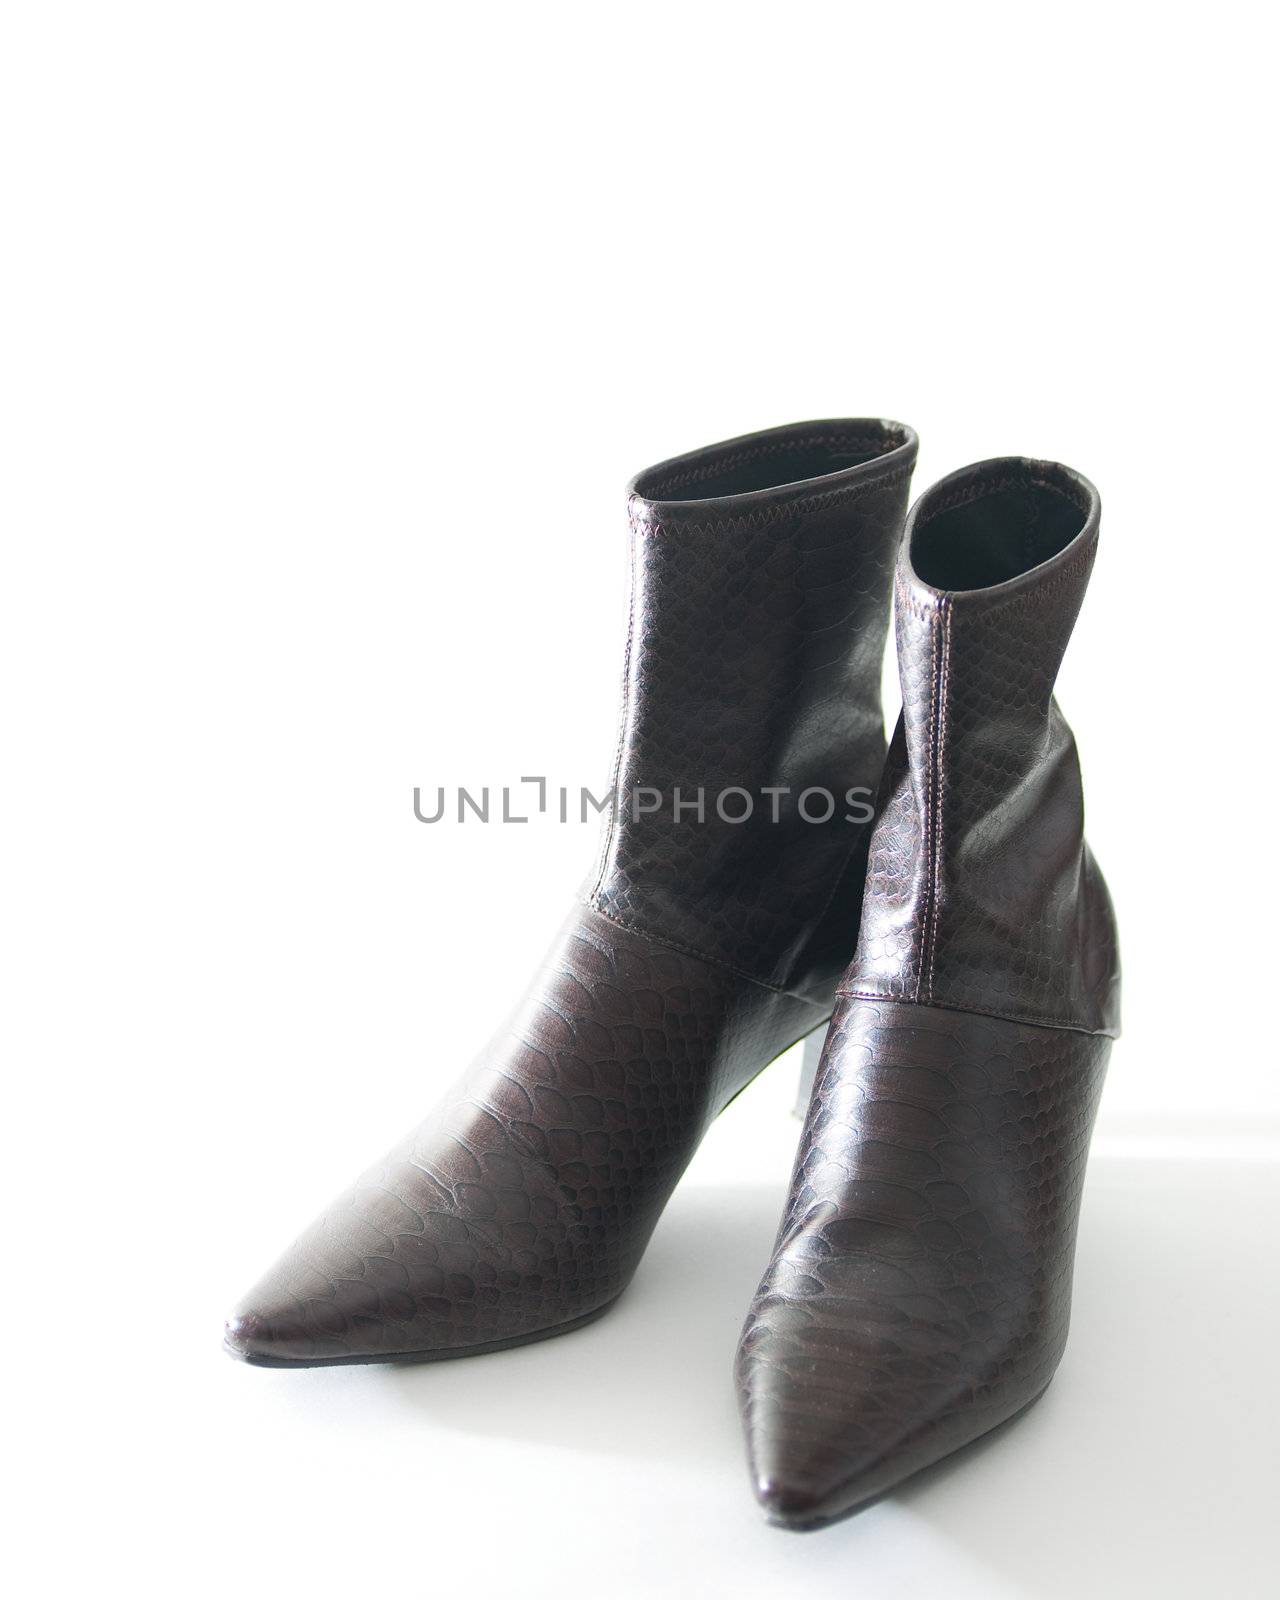 Stylish woman's high-heel boots, isolated on white.